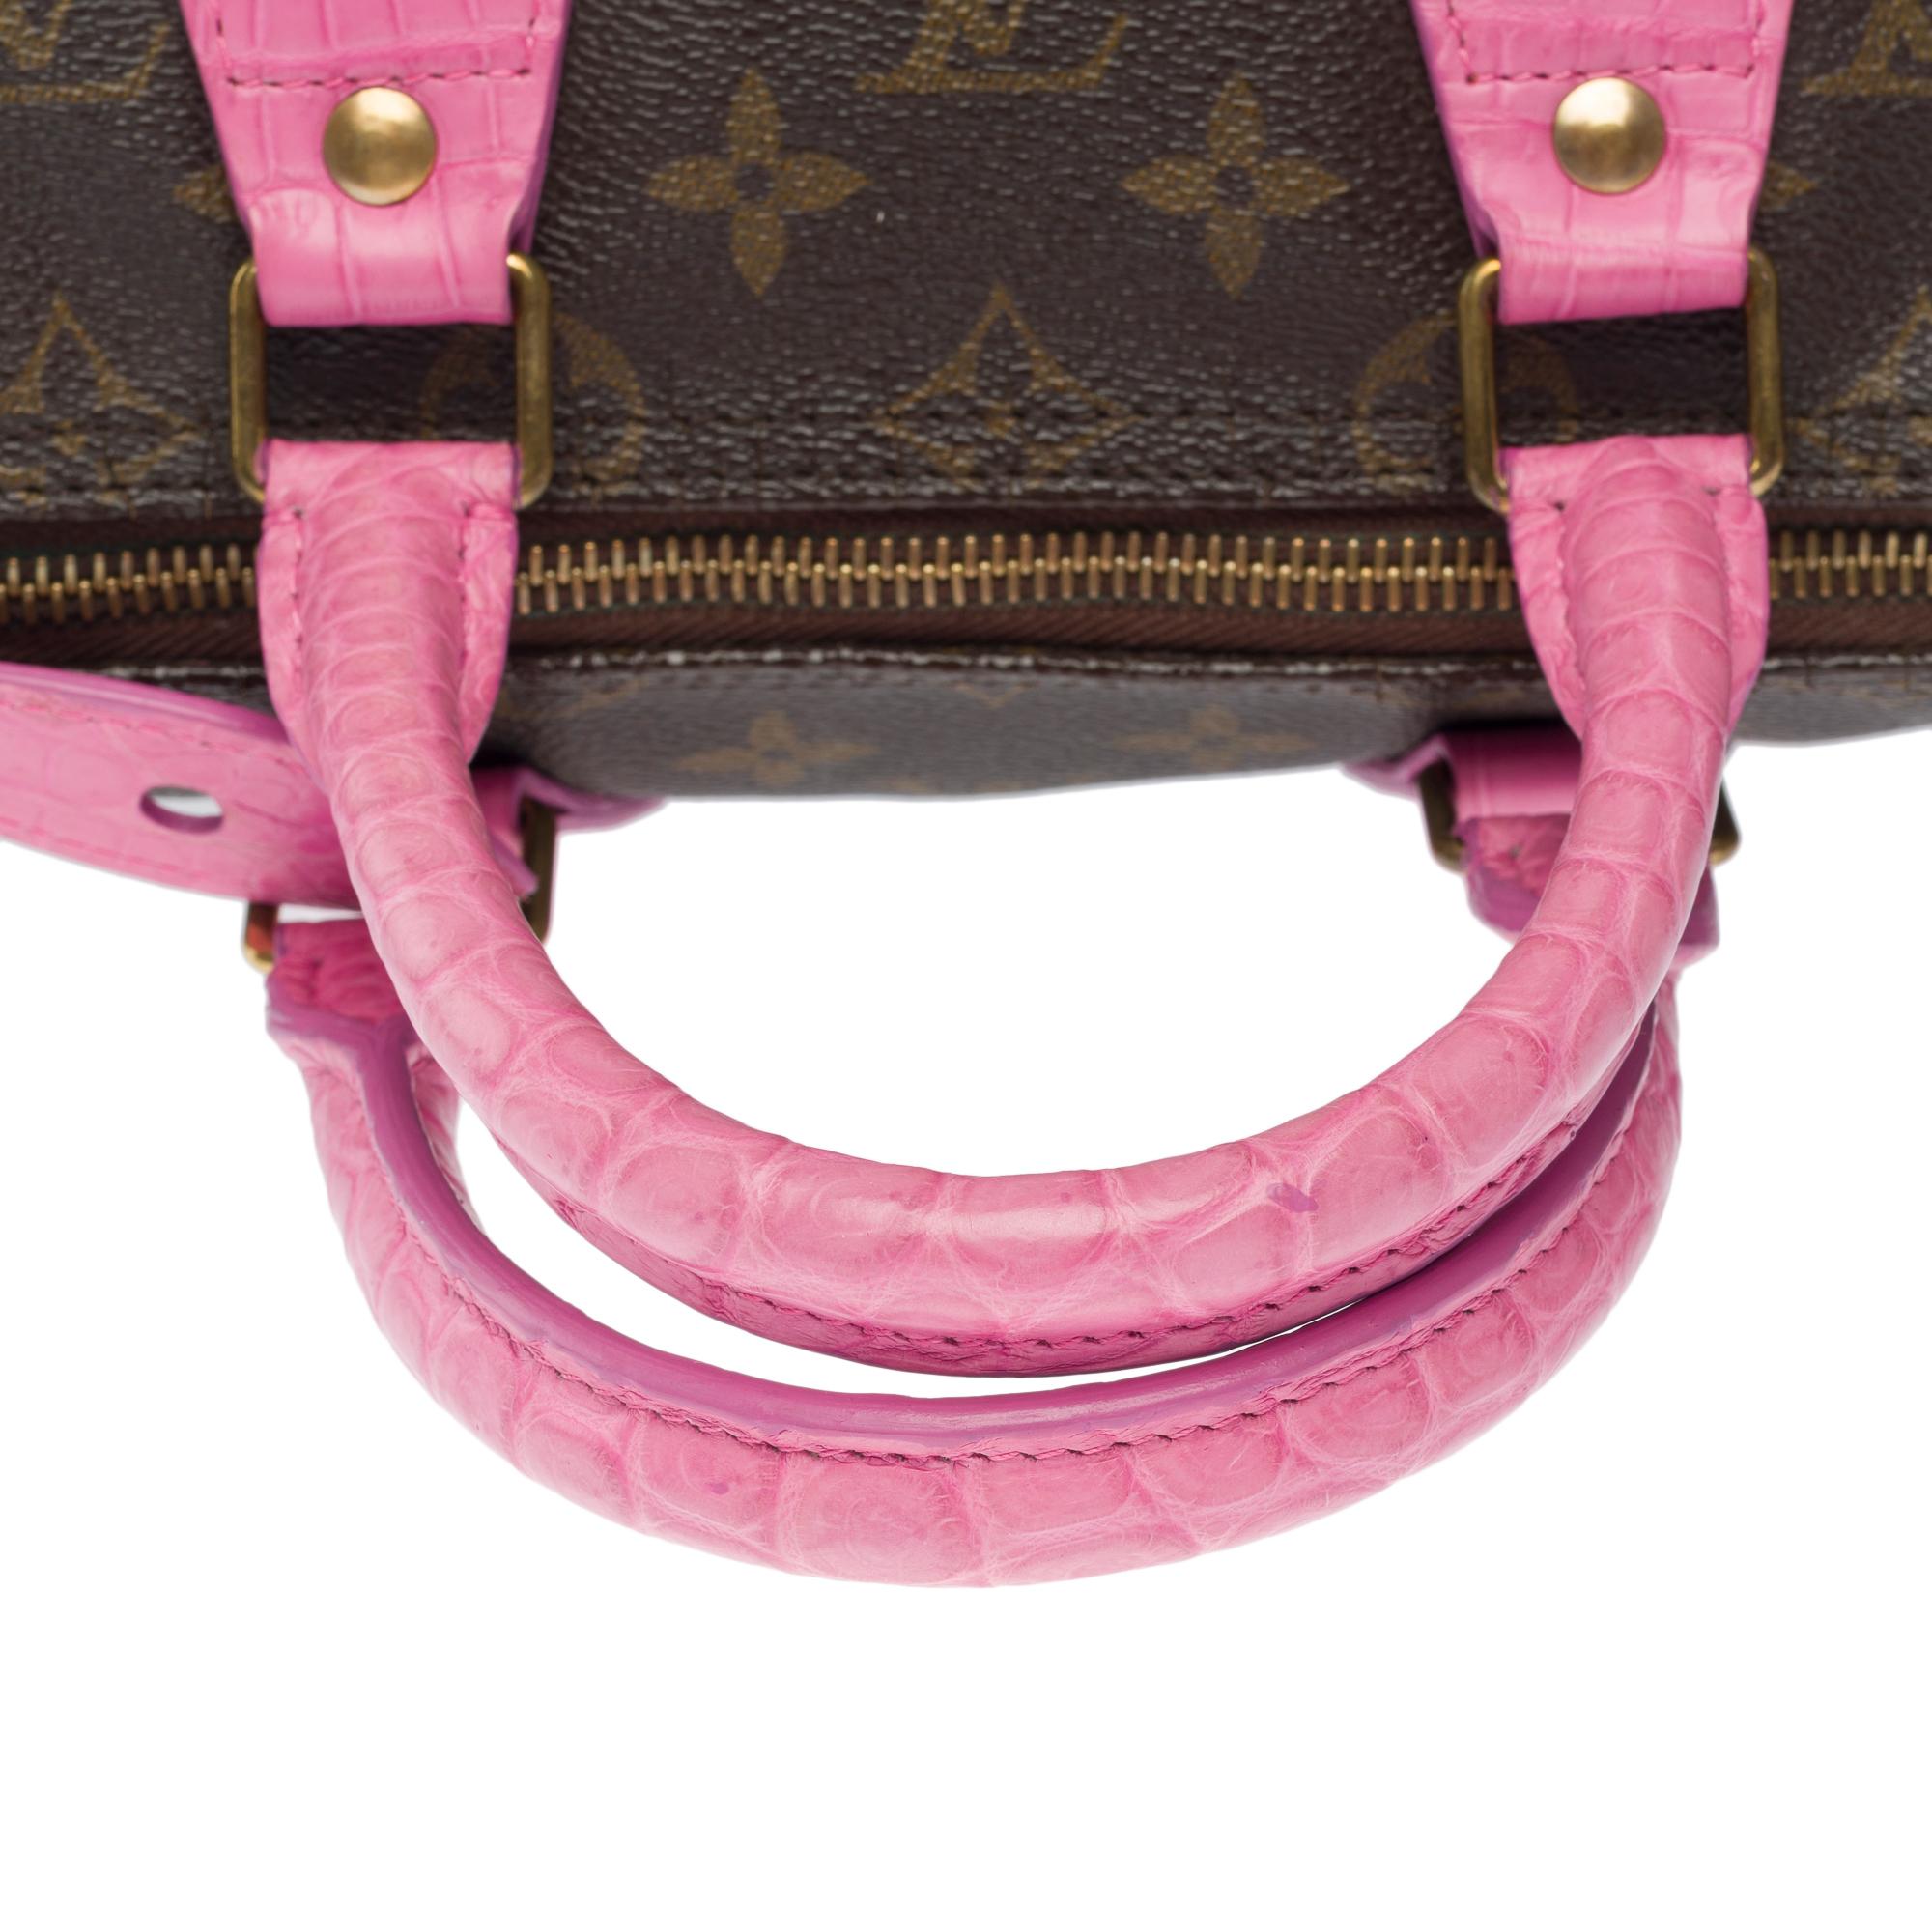 Customized Louis Vuitton Speedy 25 handbag Flowers with Pink Crocodile leather For Sale 4